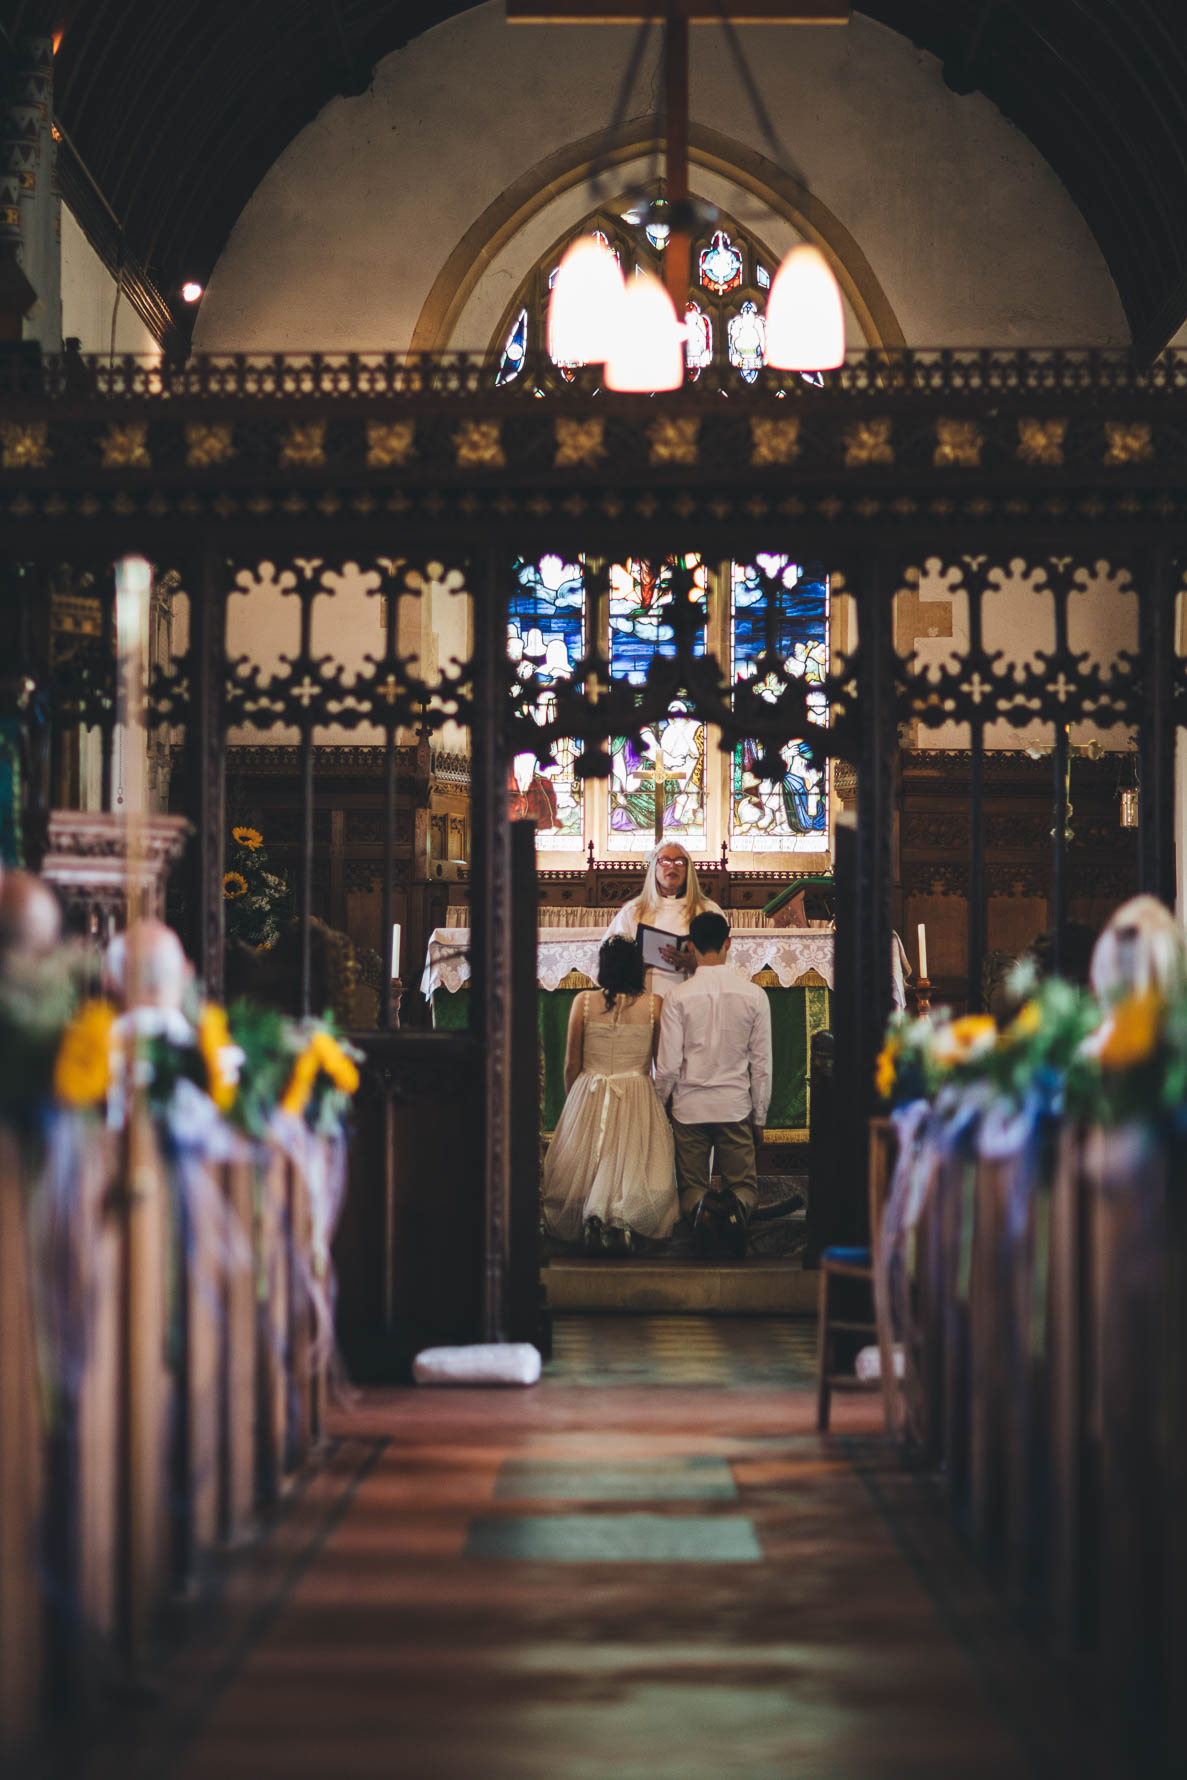 Photo from the end of the aisle looking down the aisle towards the bride and groom who are kneeling in front of a priest during their wedding ceremony. There are large stained glass windos on the back wall above the couple